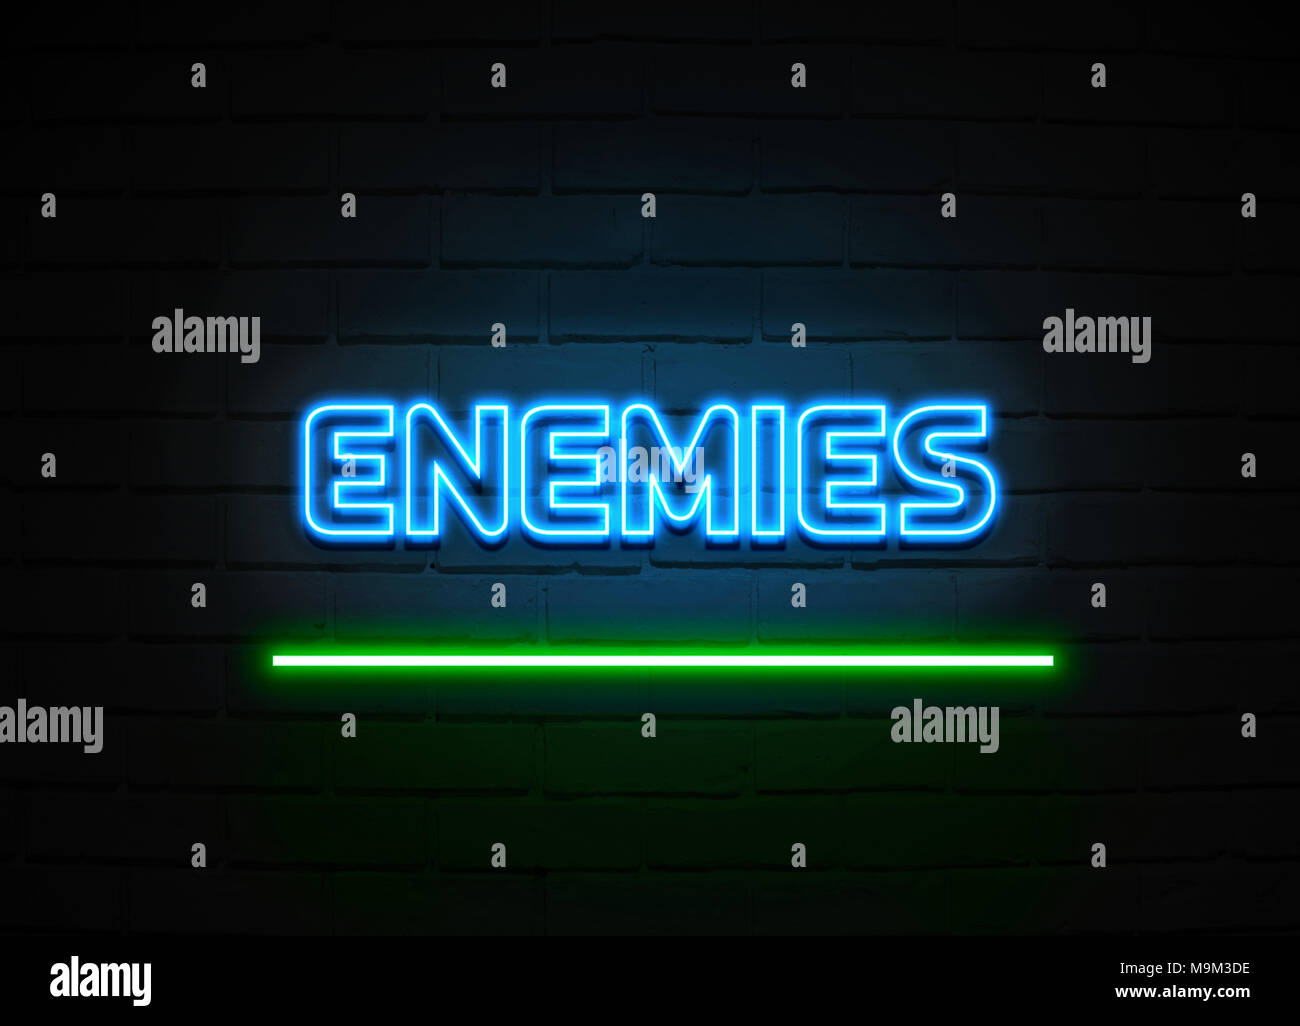 enemies-neon-sign-glowing-neon-sign-on-brickwall-wall-3d-rendered-royalty-free-stock-illustration-M9M3DE.jpg